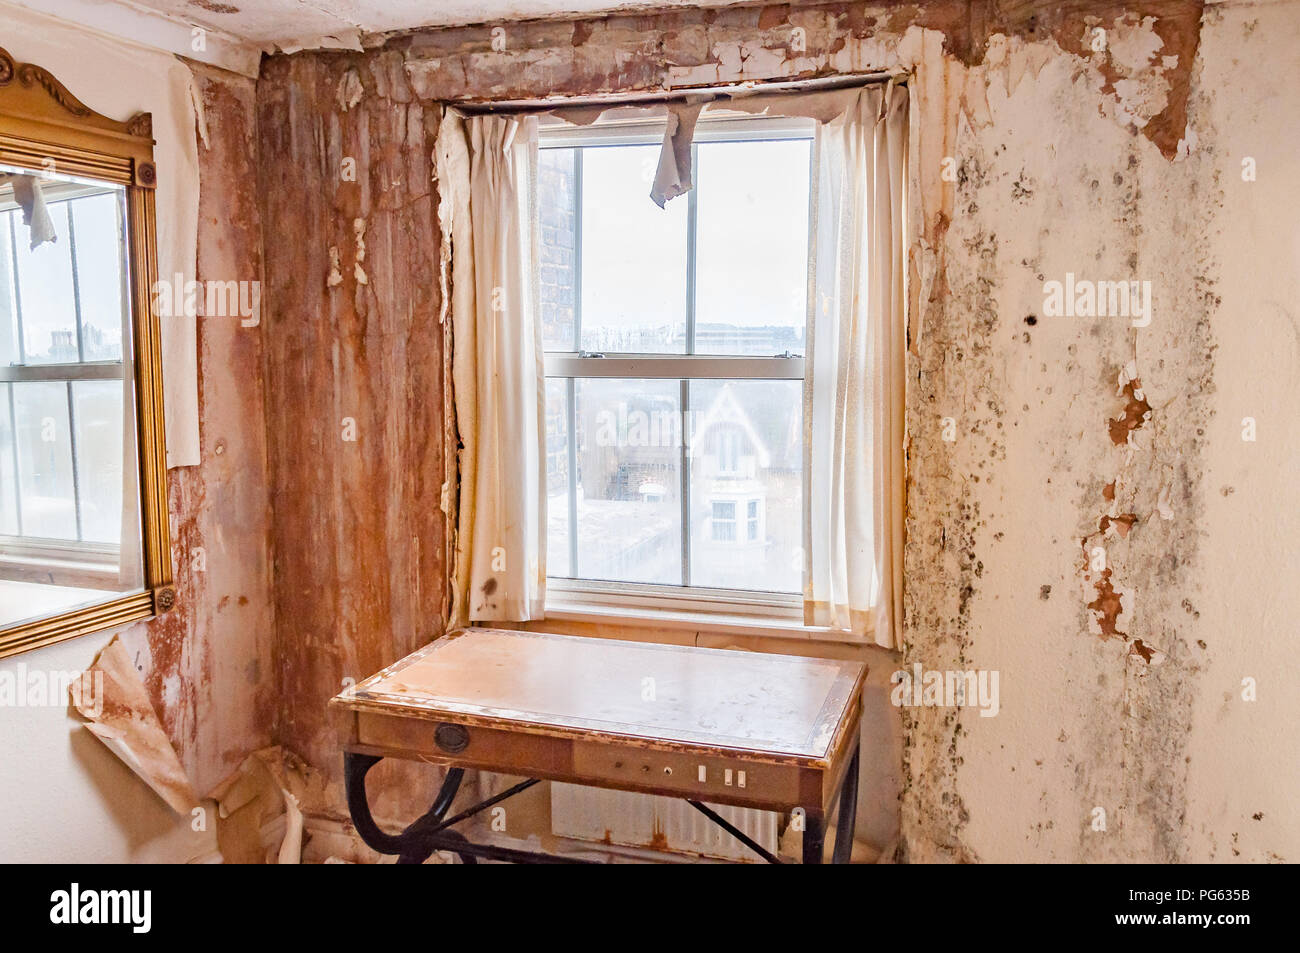 A dilapidated room with peeling paper and rotting walls in the Nayland Rock Hotel, Margate, England, UK Stock Photo